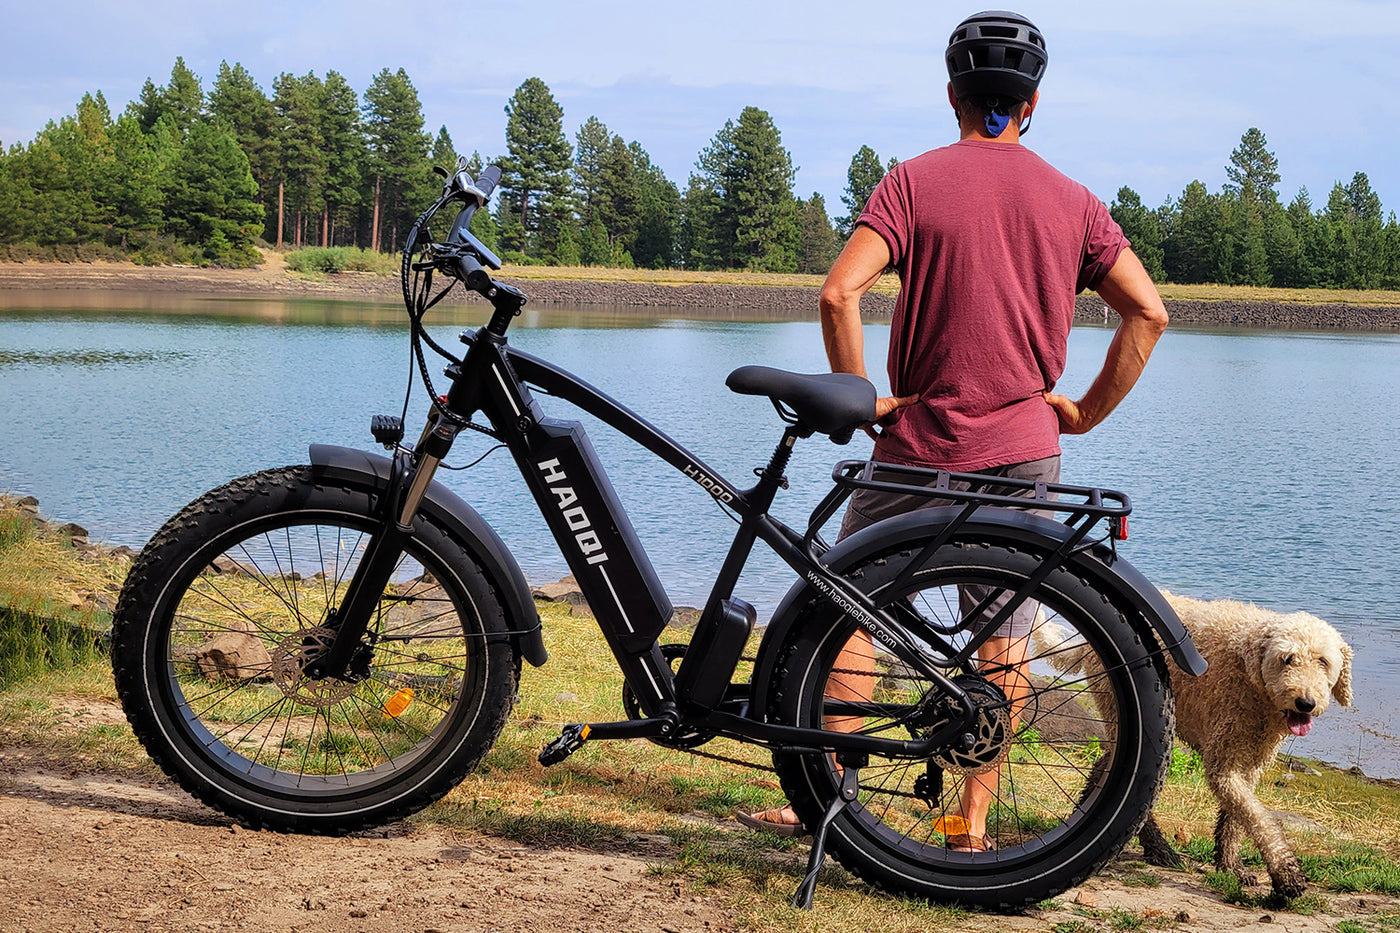 The Best Selling Fat Tire Electric Bikes